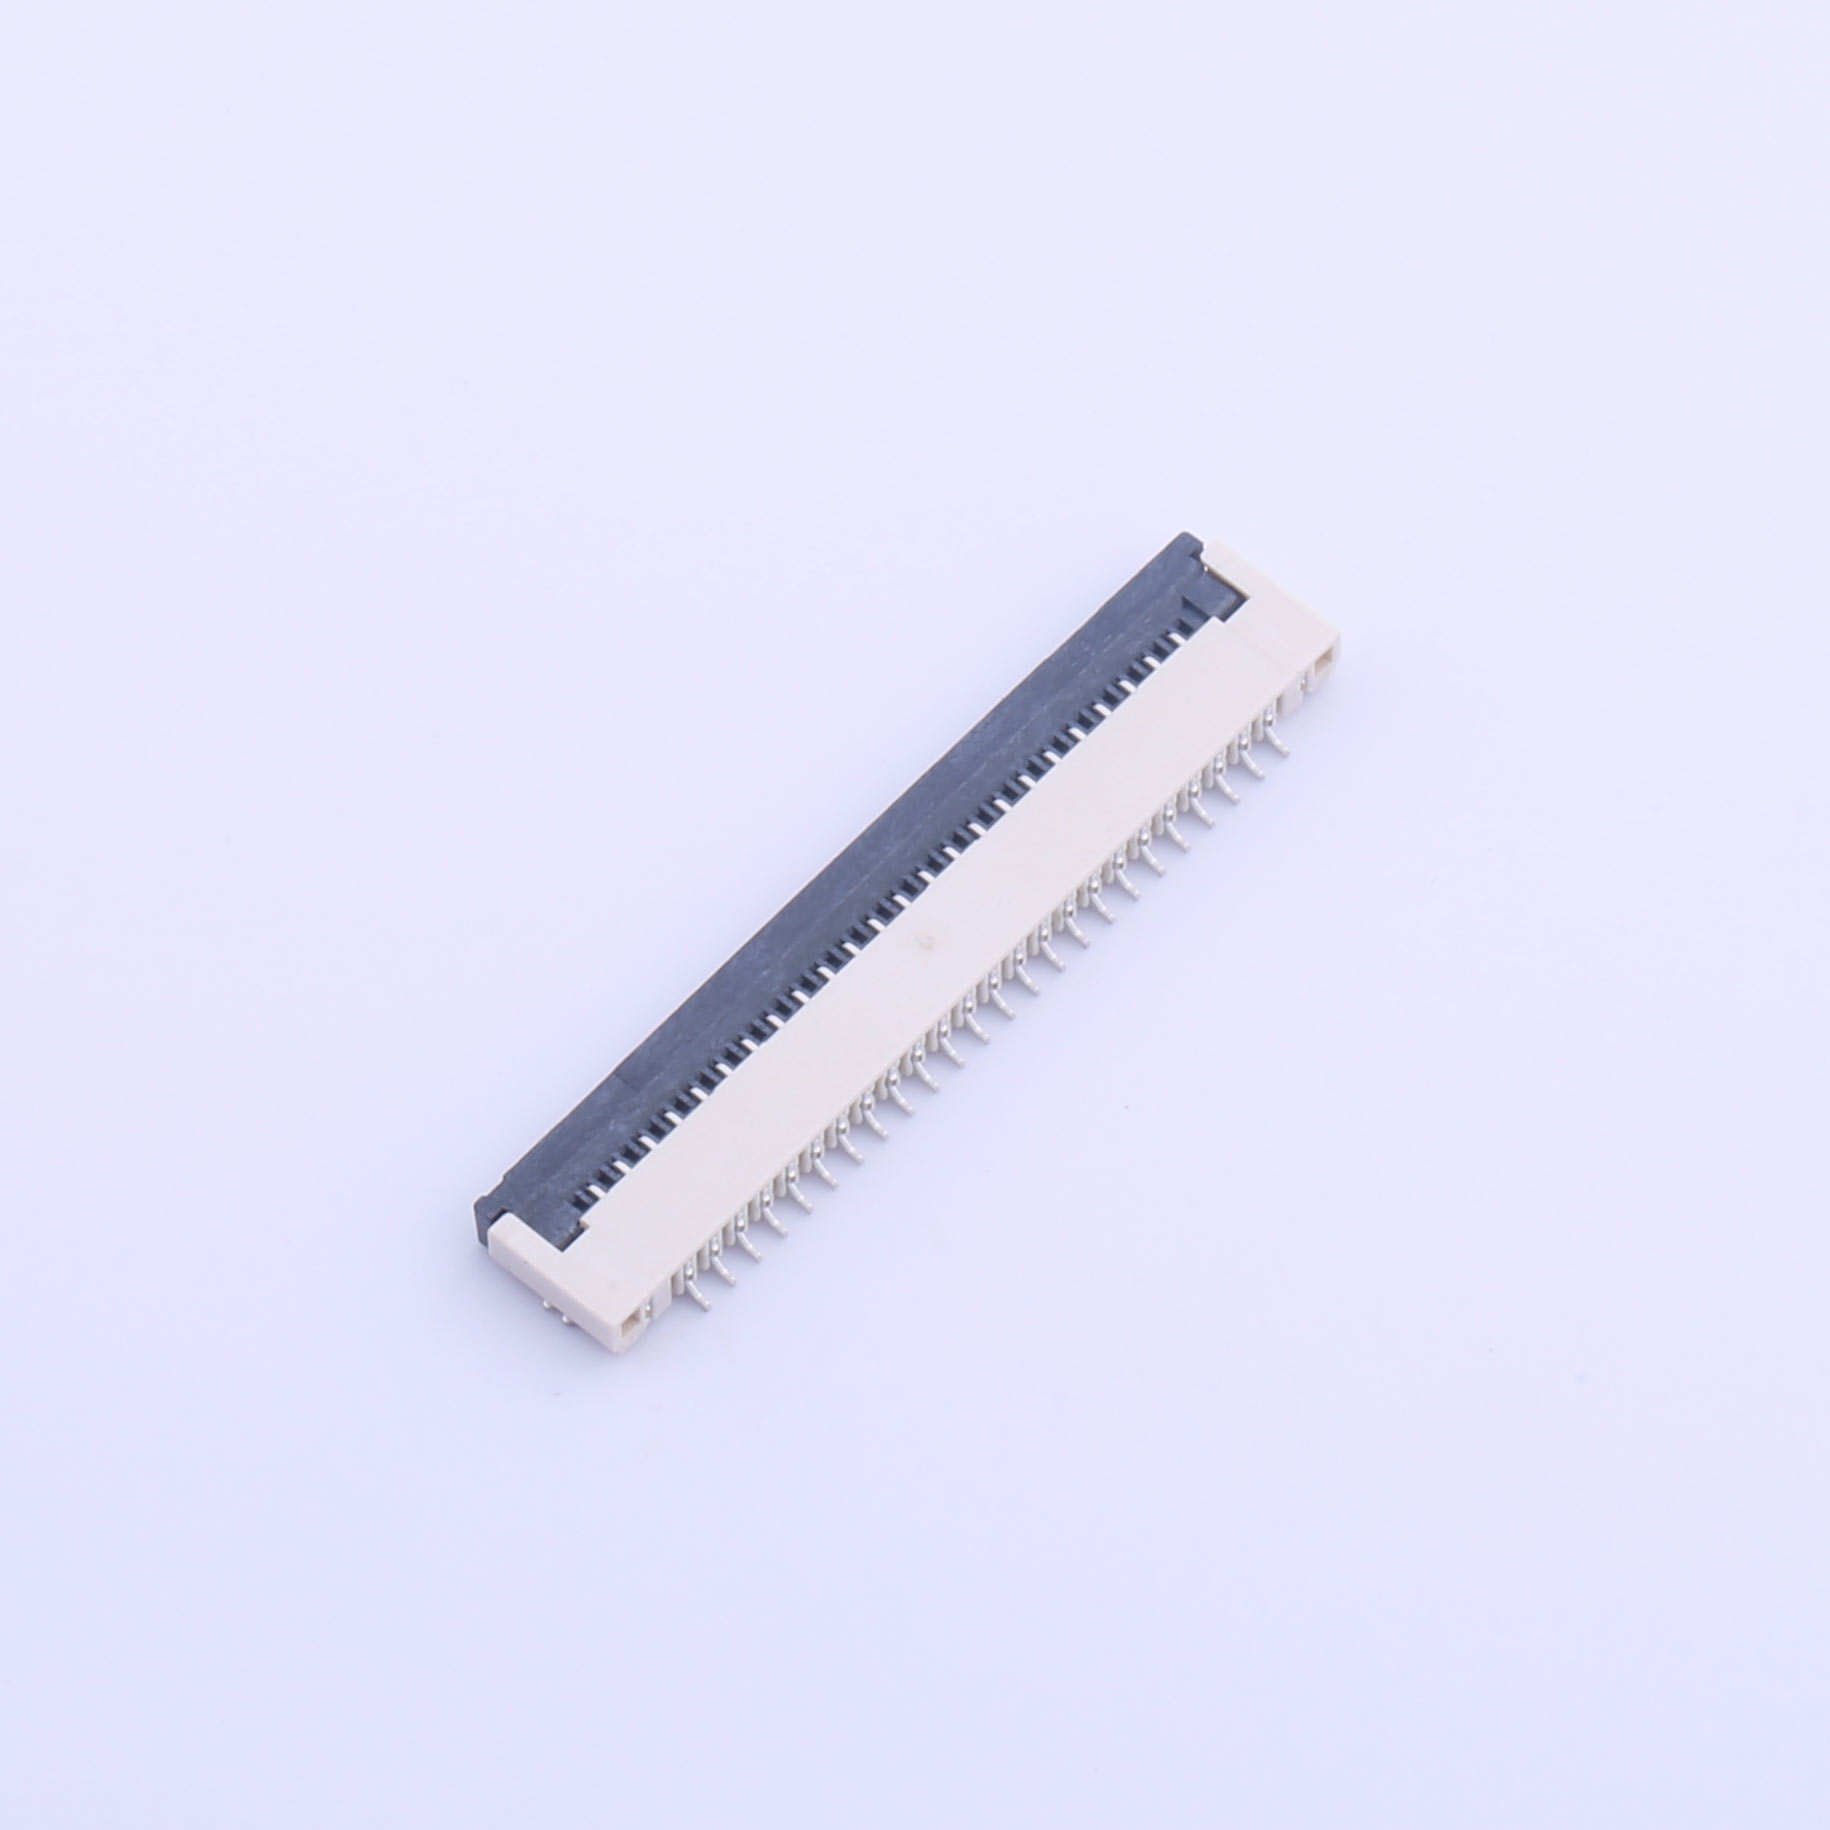 Kinghelm Pitch 1mm FFC/FPC Connector 24p - KH-FG1.0-H2.0-24pin